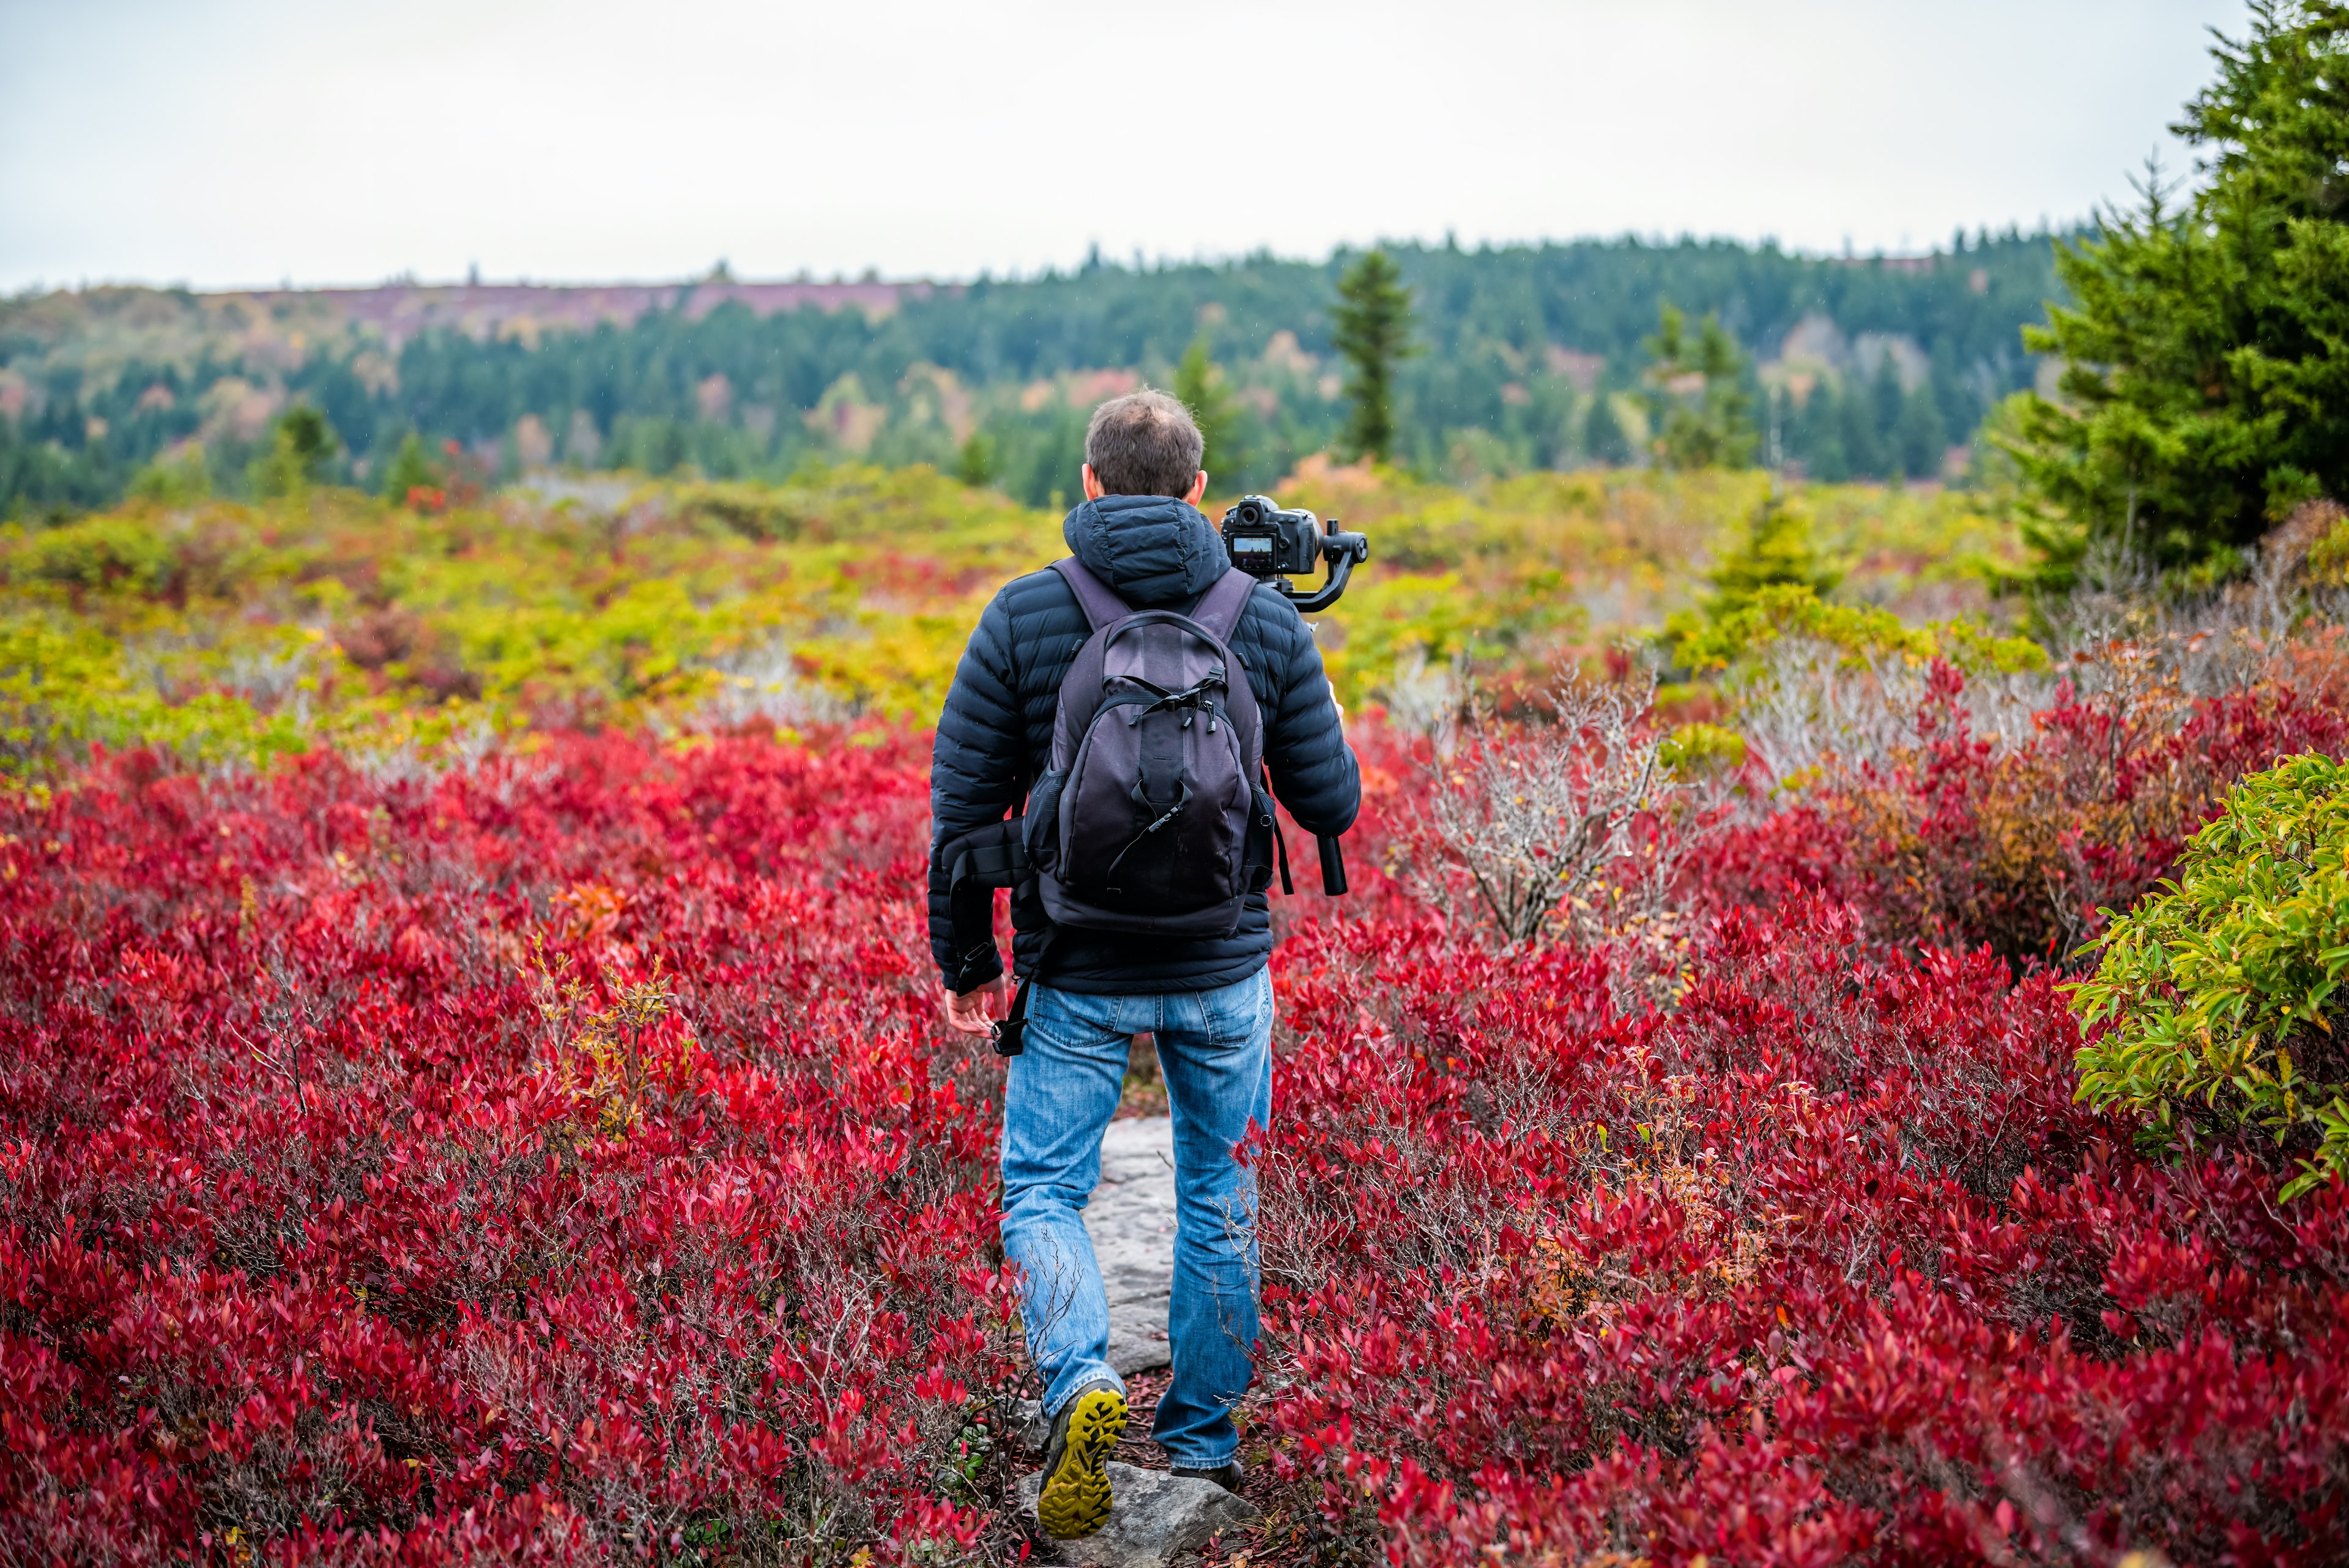 Man photographer with camera and tripod stabilizing gimbal hiking on autumn Bear Rocks trail in Dolly Sods, West Virginia filming video of red huckleberry bushes.